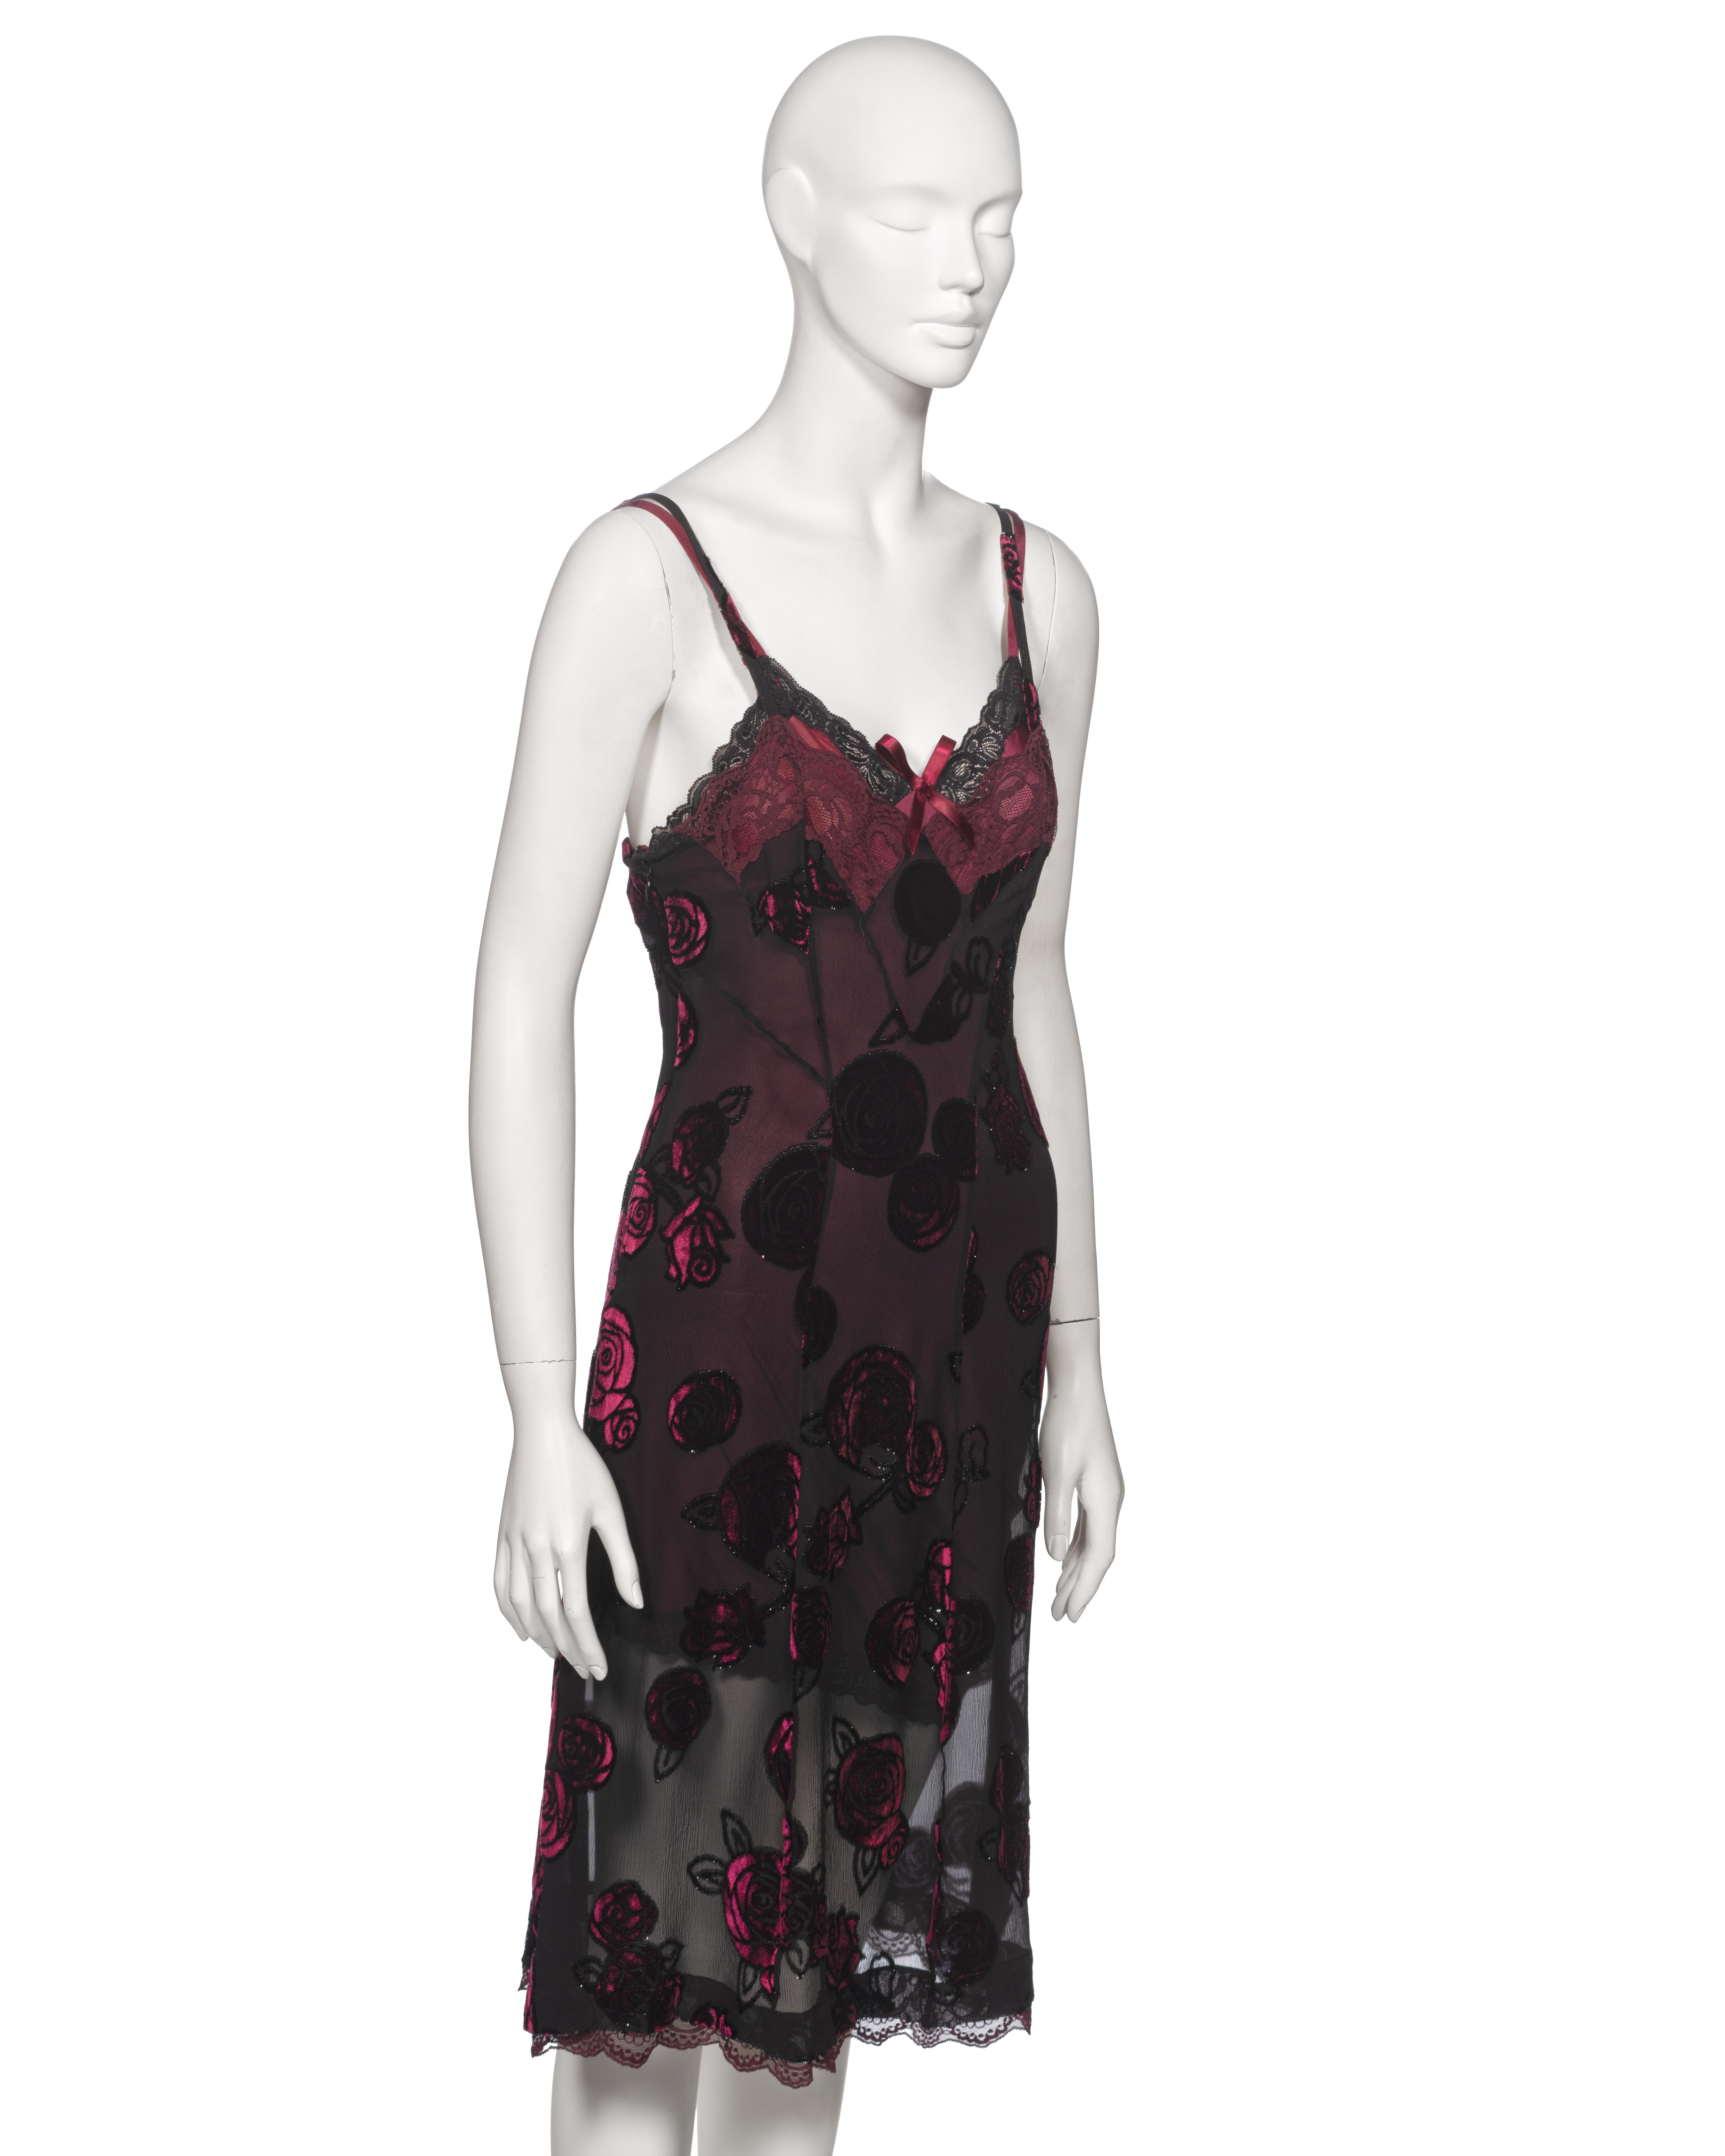 Christian Dior by John Galliano Double Layered Bordeaux Slip Dress, FW 2005 For Sale 3